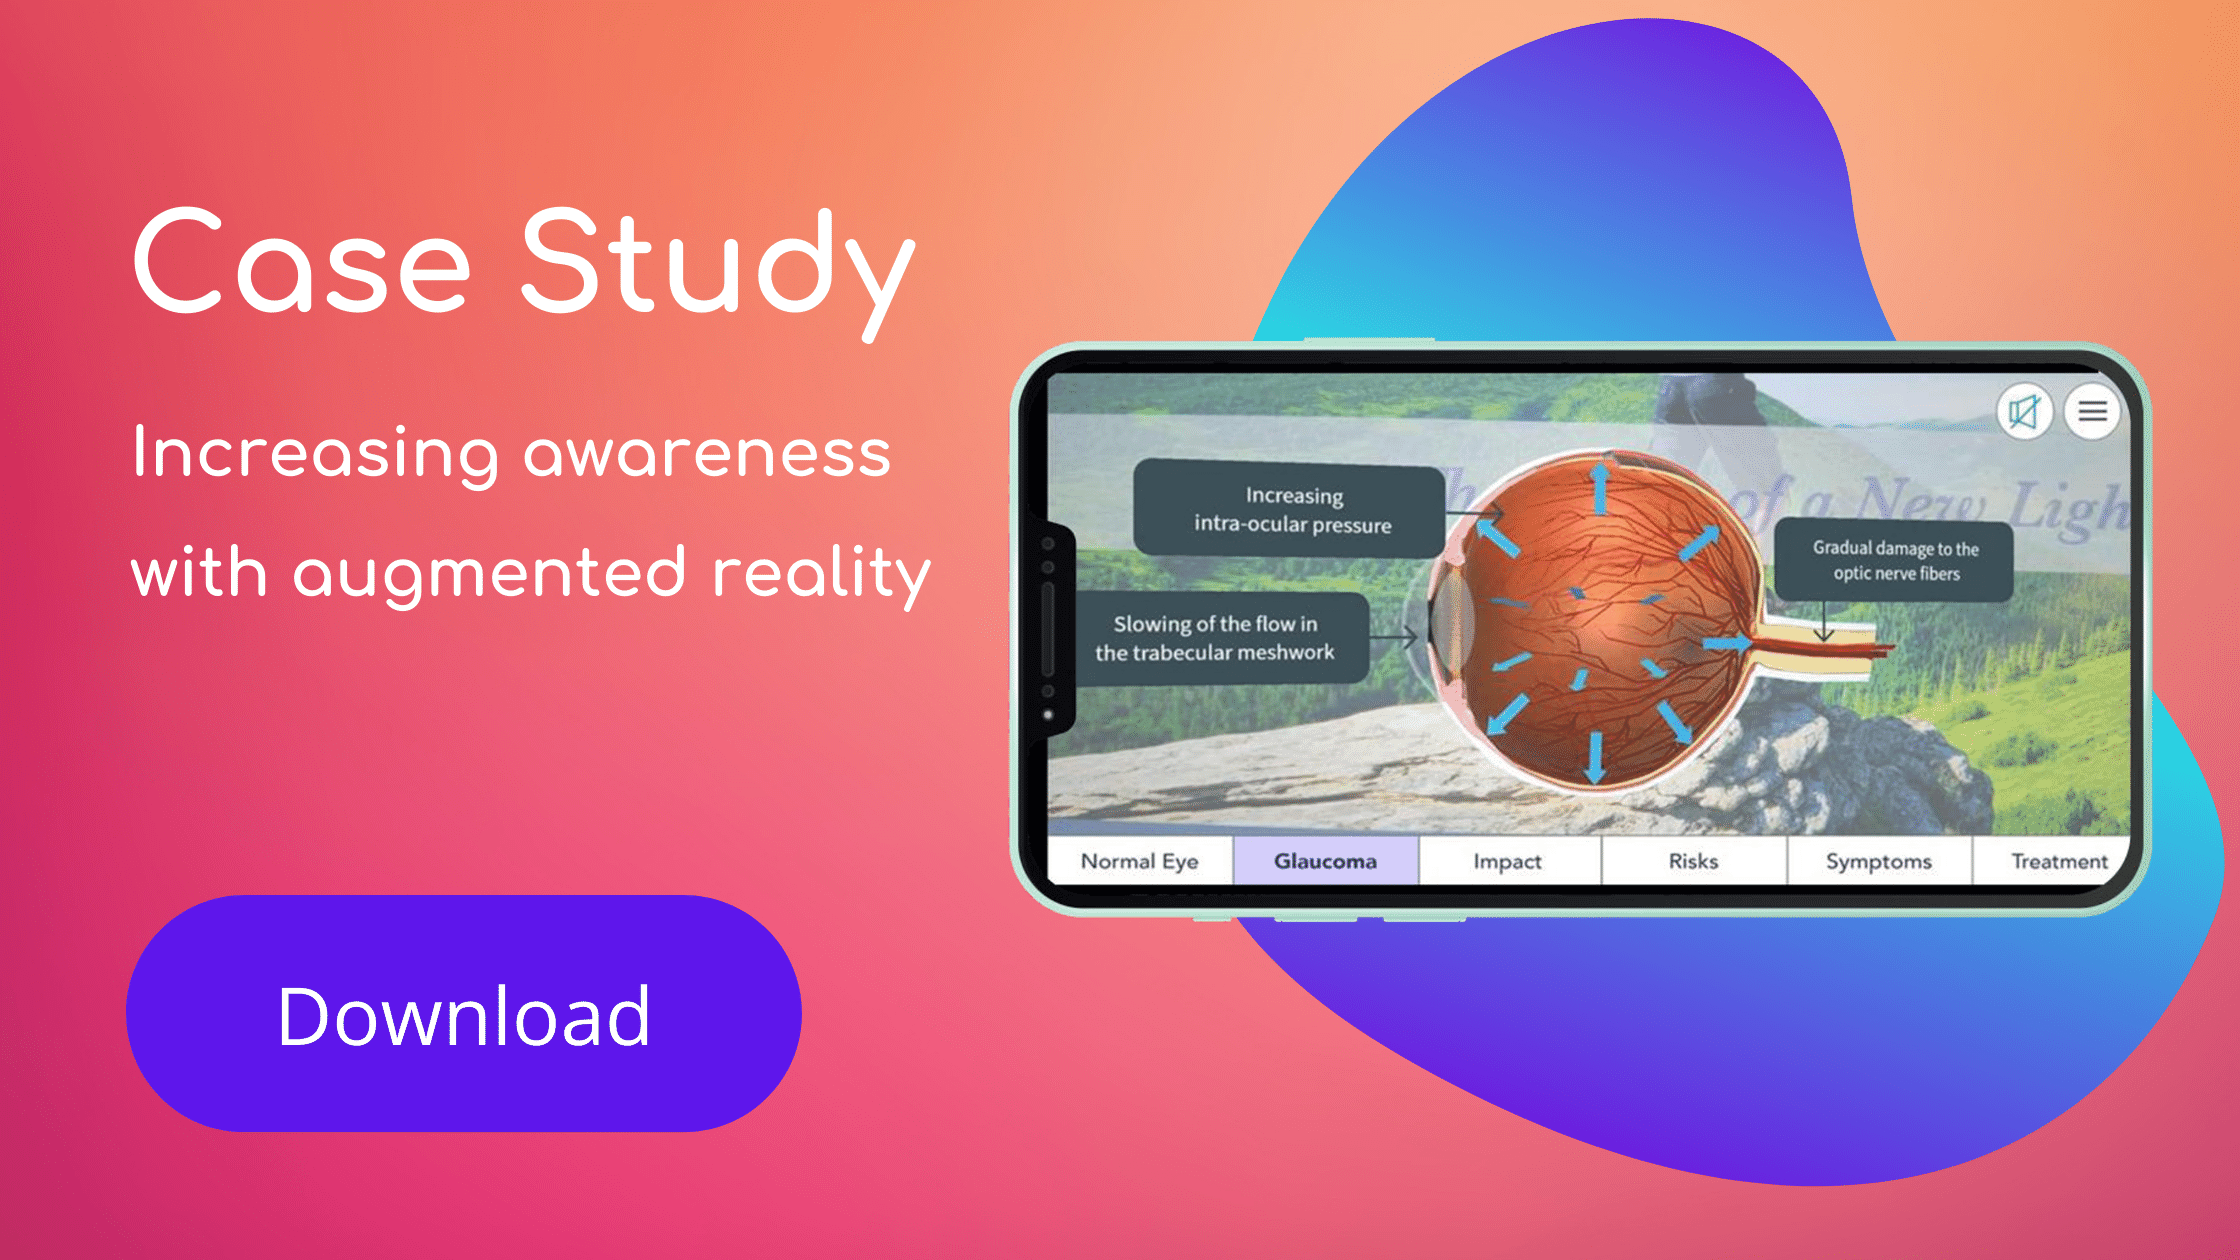 Increasing awareness with Augmented Reality